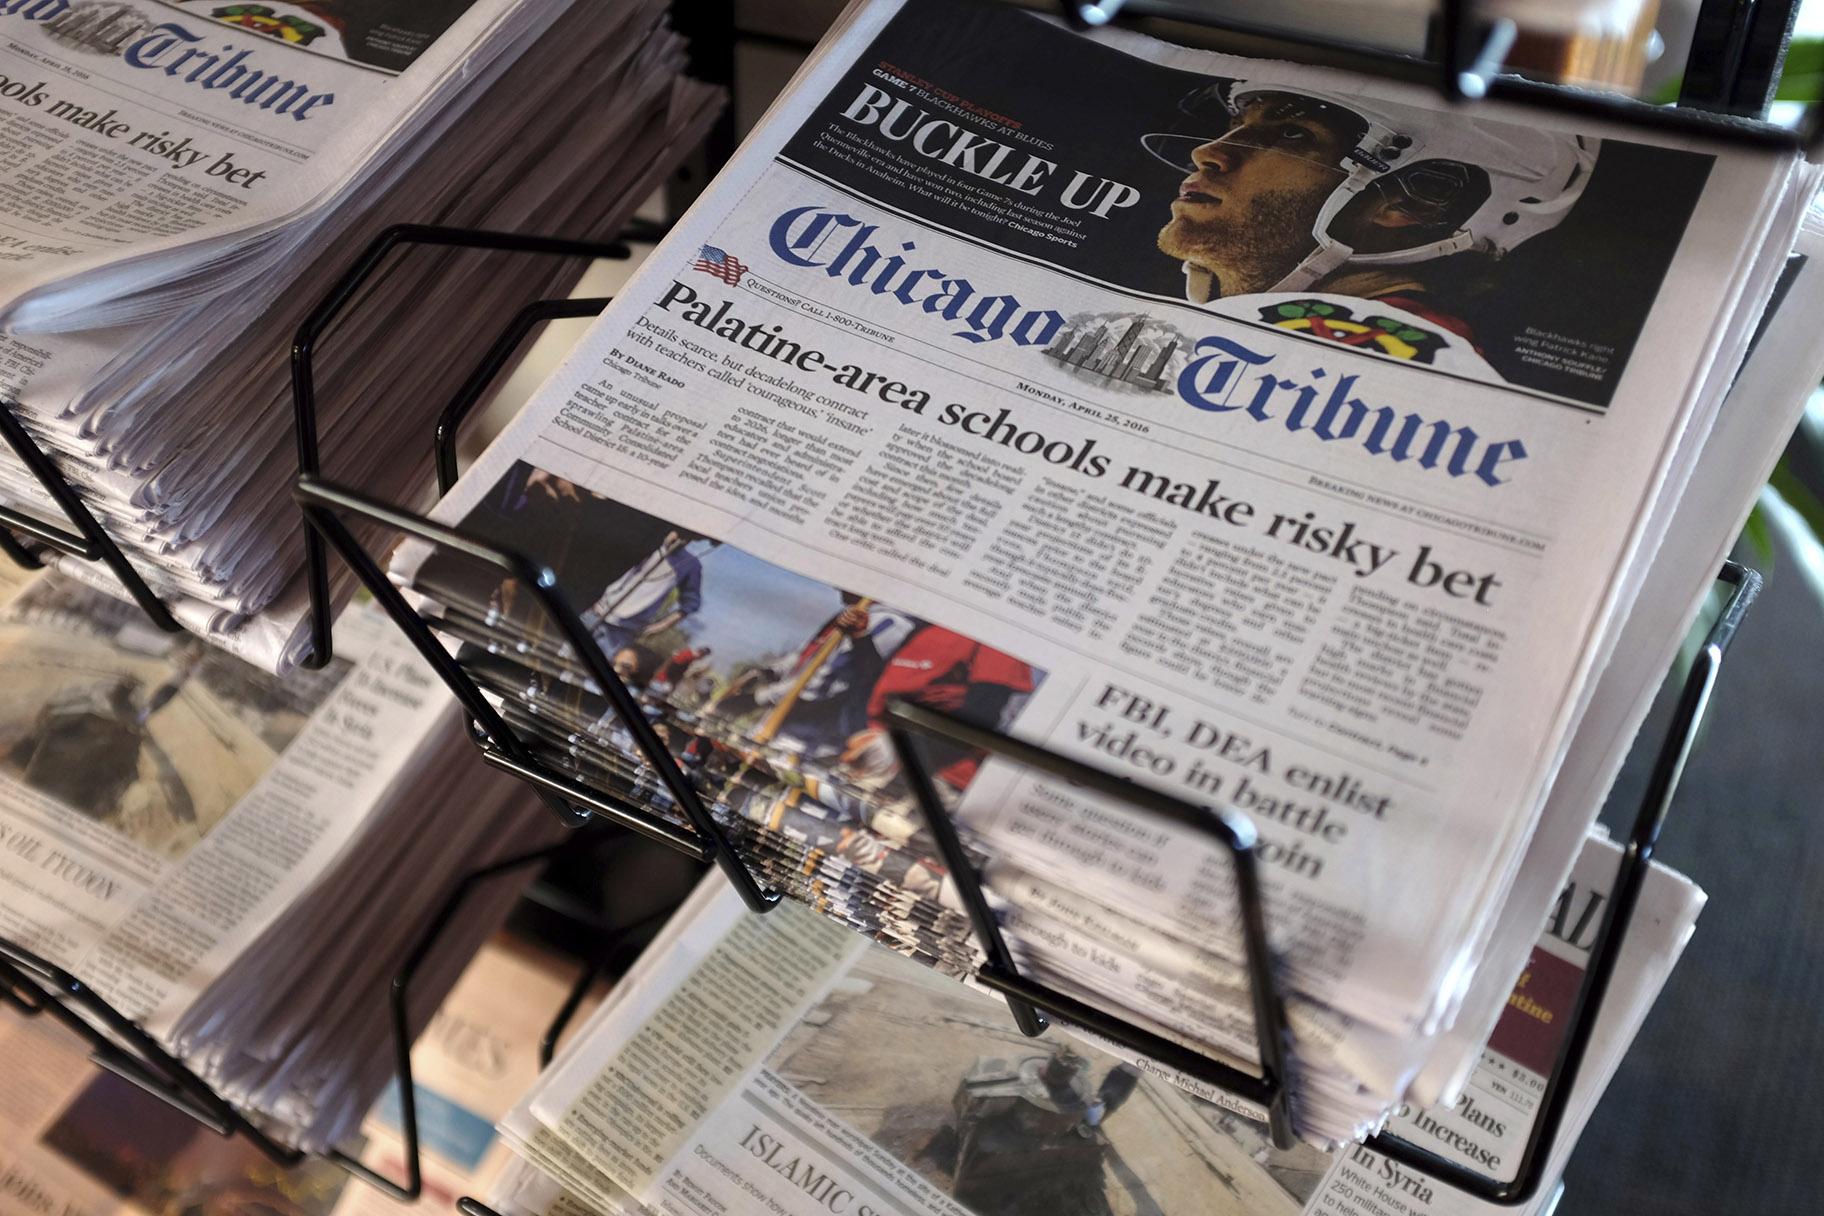 In this Monday, April 25, 2016, file photo, Chicago Tribune and other newspapers are displayed at Chicago’s O’Hare International Airport. (AP Photo / Kiichiro Sato, File)